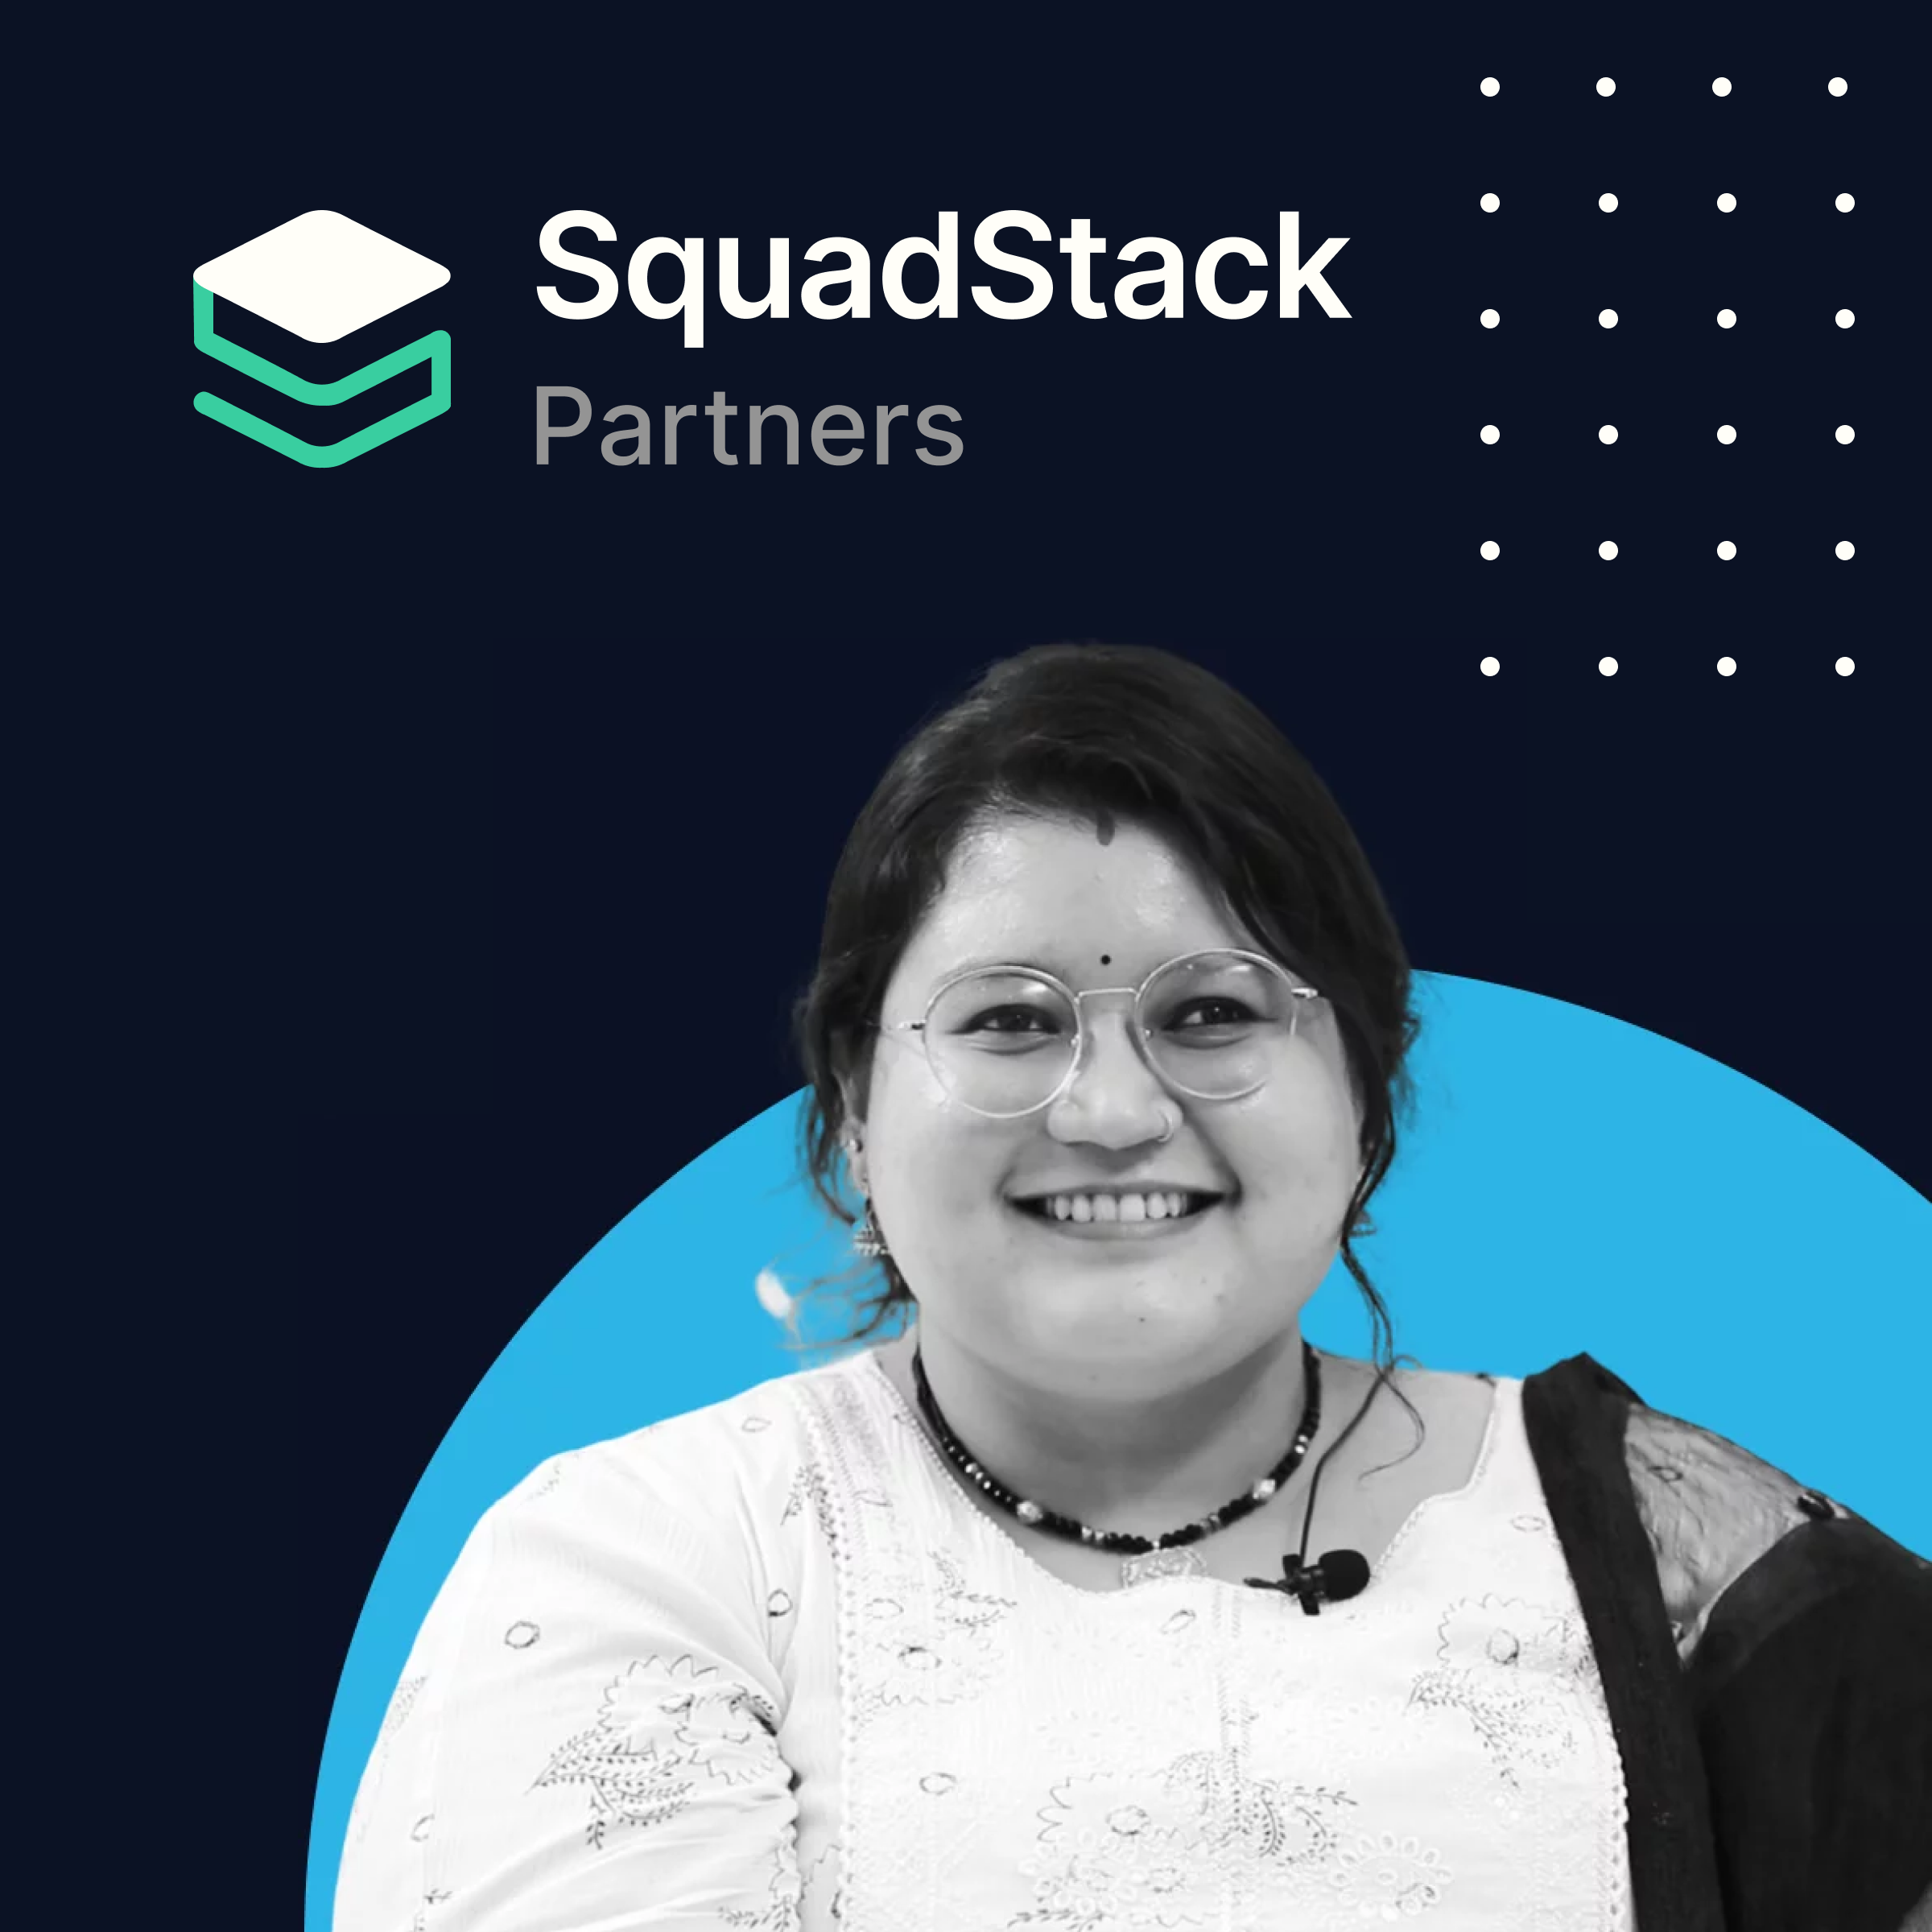 SquadStack Partners